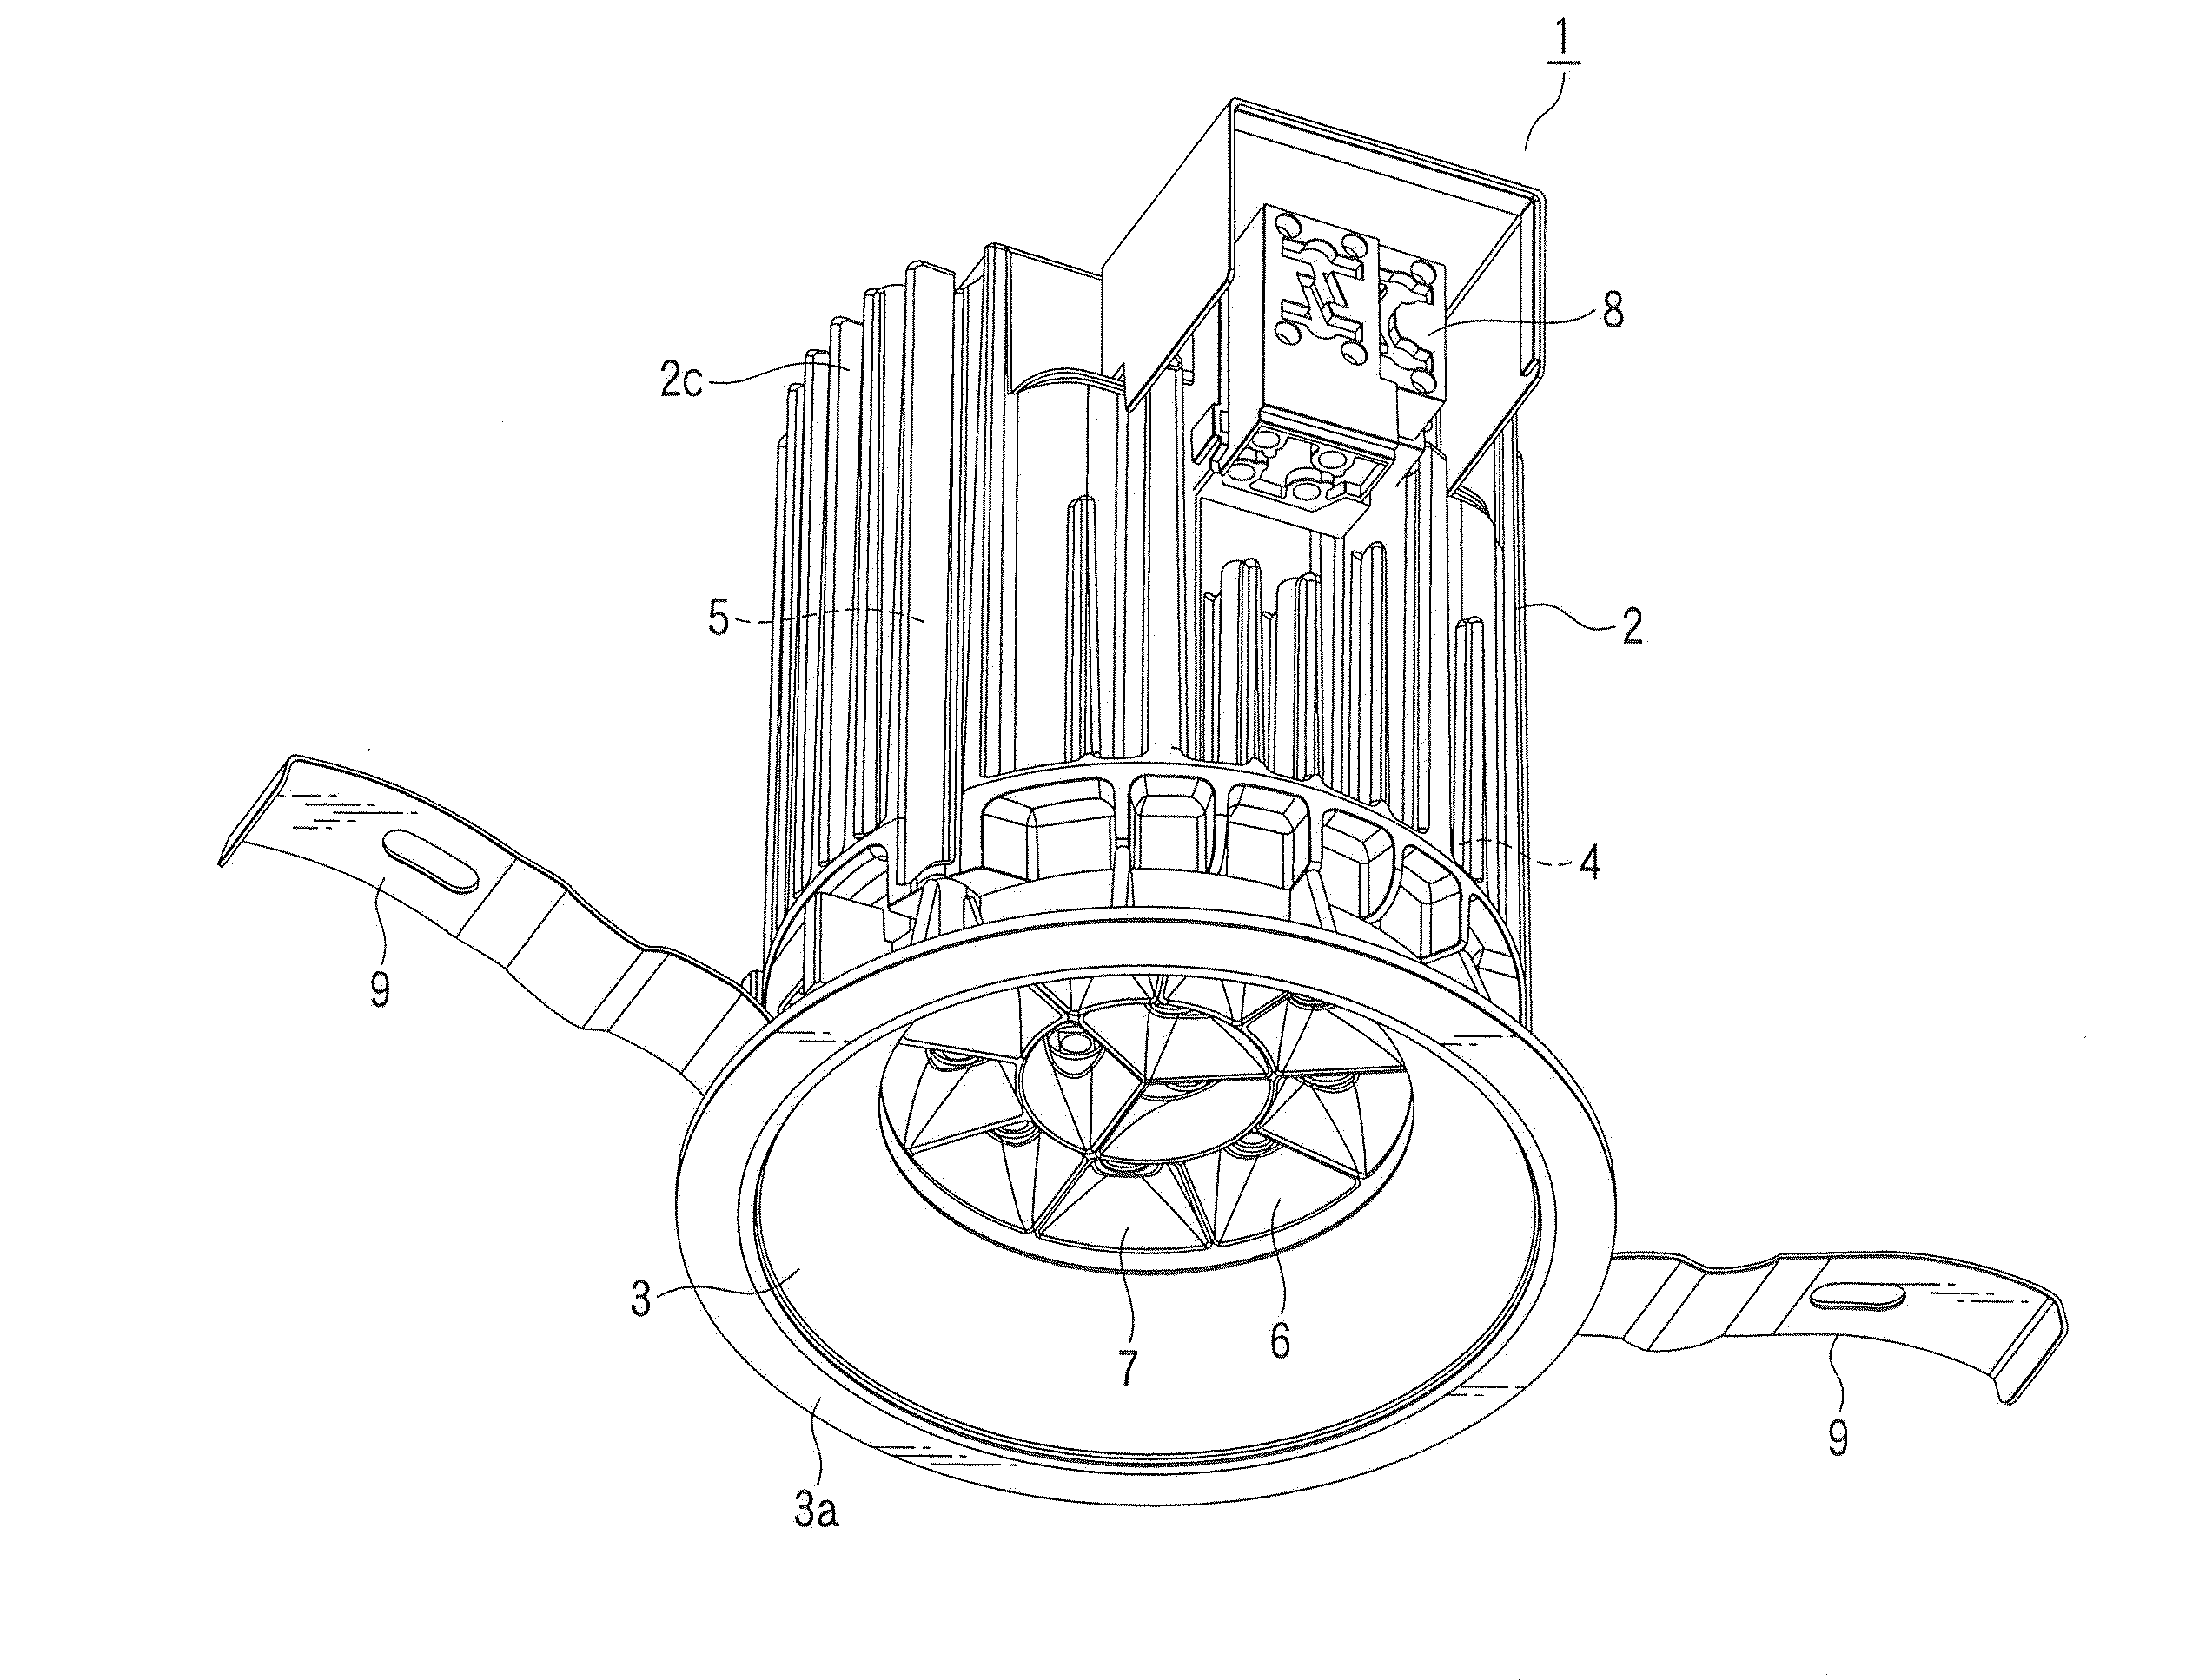 Lighting apparatus and substrate having plurality of light-emitting elements mounted thereon and incorporated in this lighting apparatus